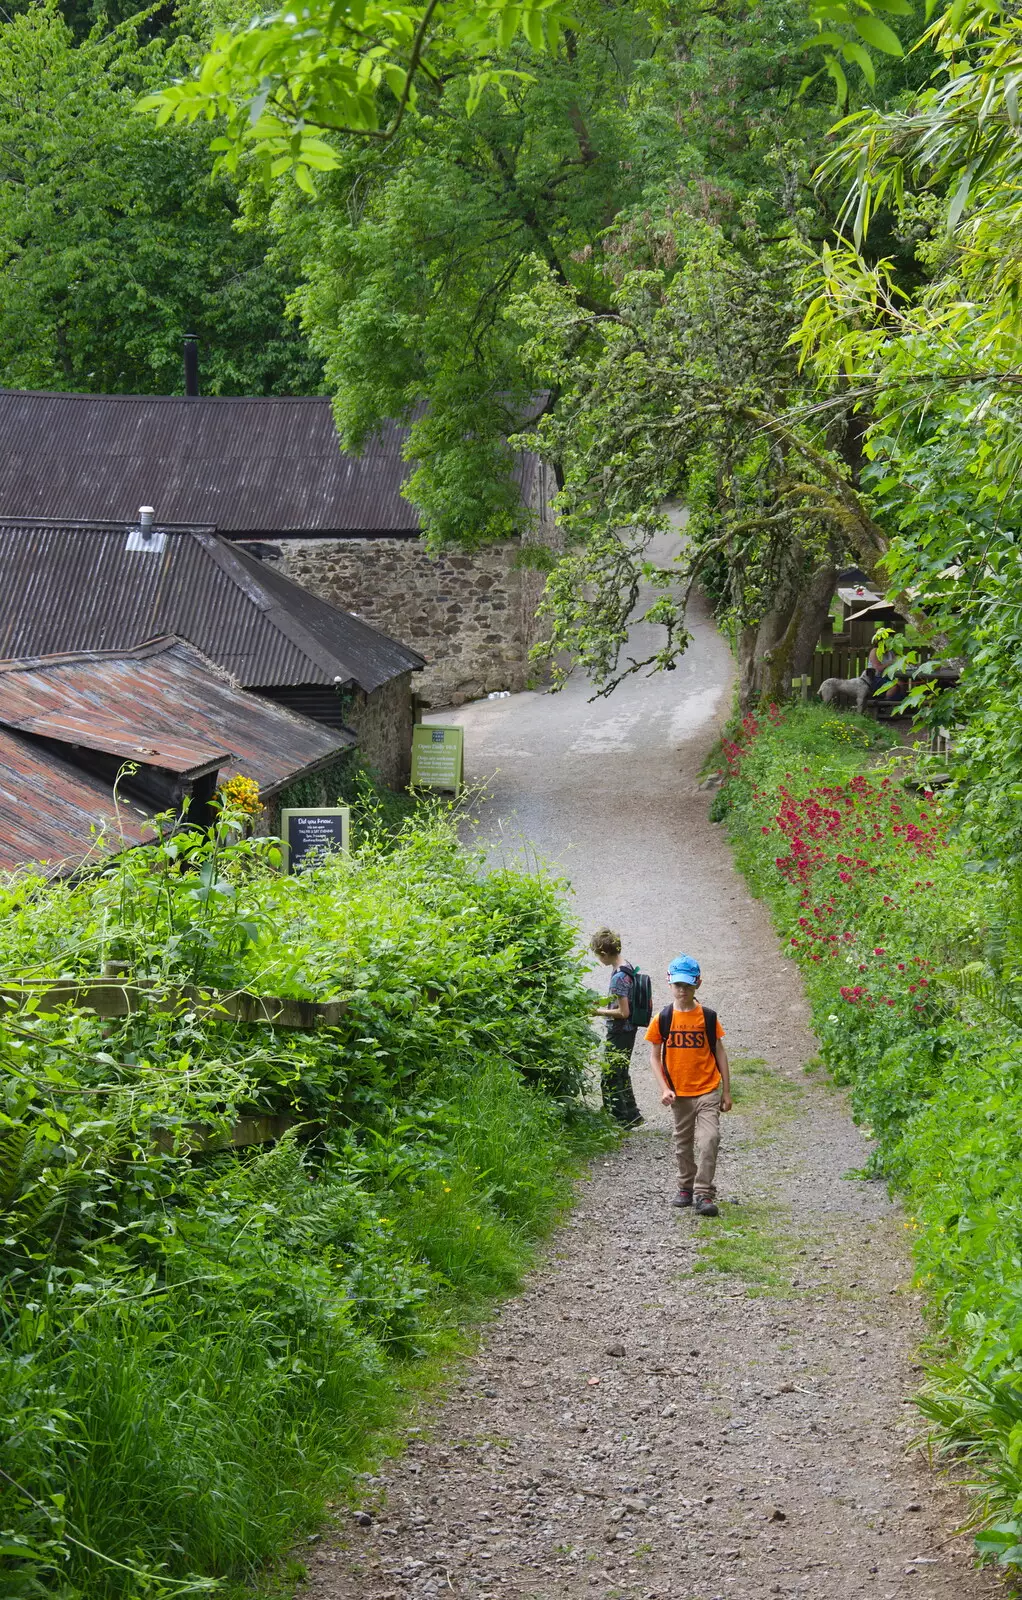 The boys on a path, from Chagford Lido and a Trip to Parke, Bovey Tracey, Devon - 25th May 2019